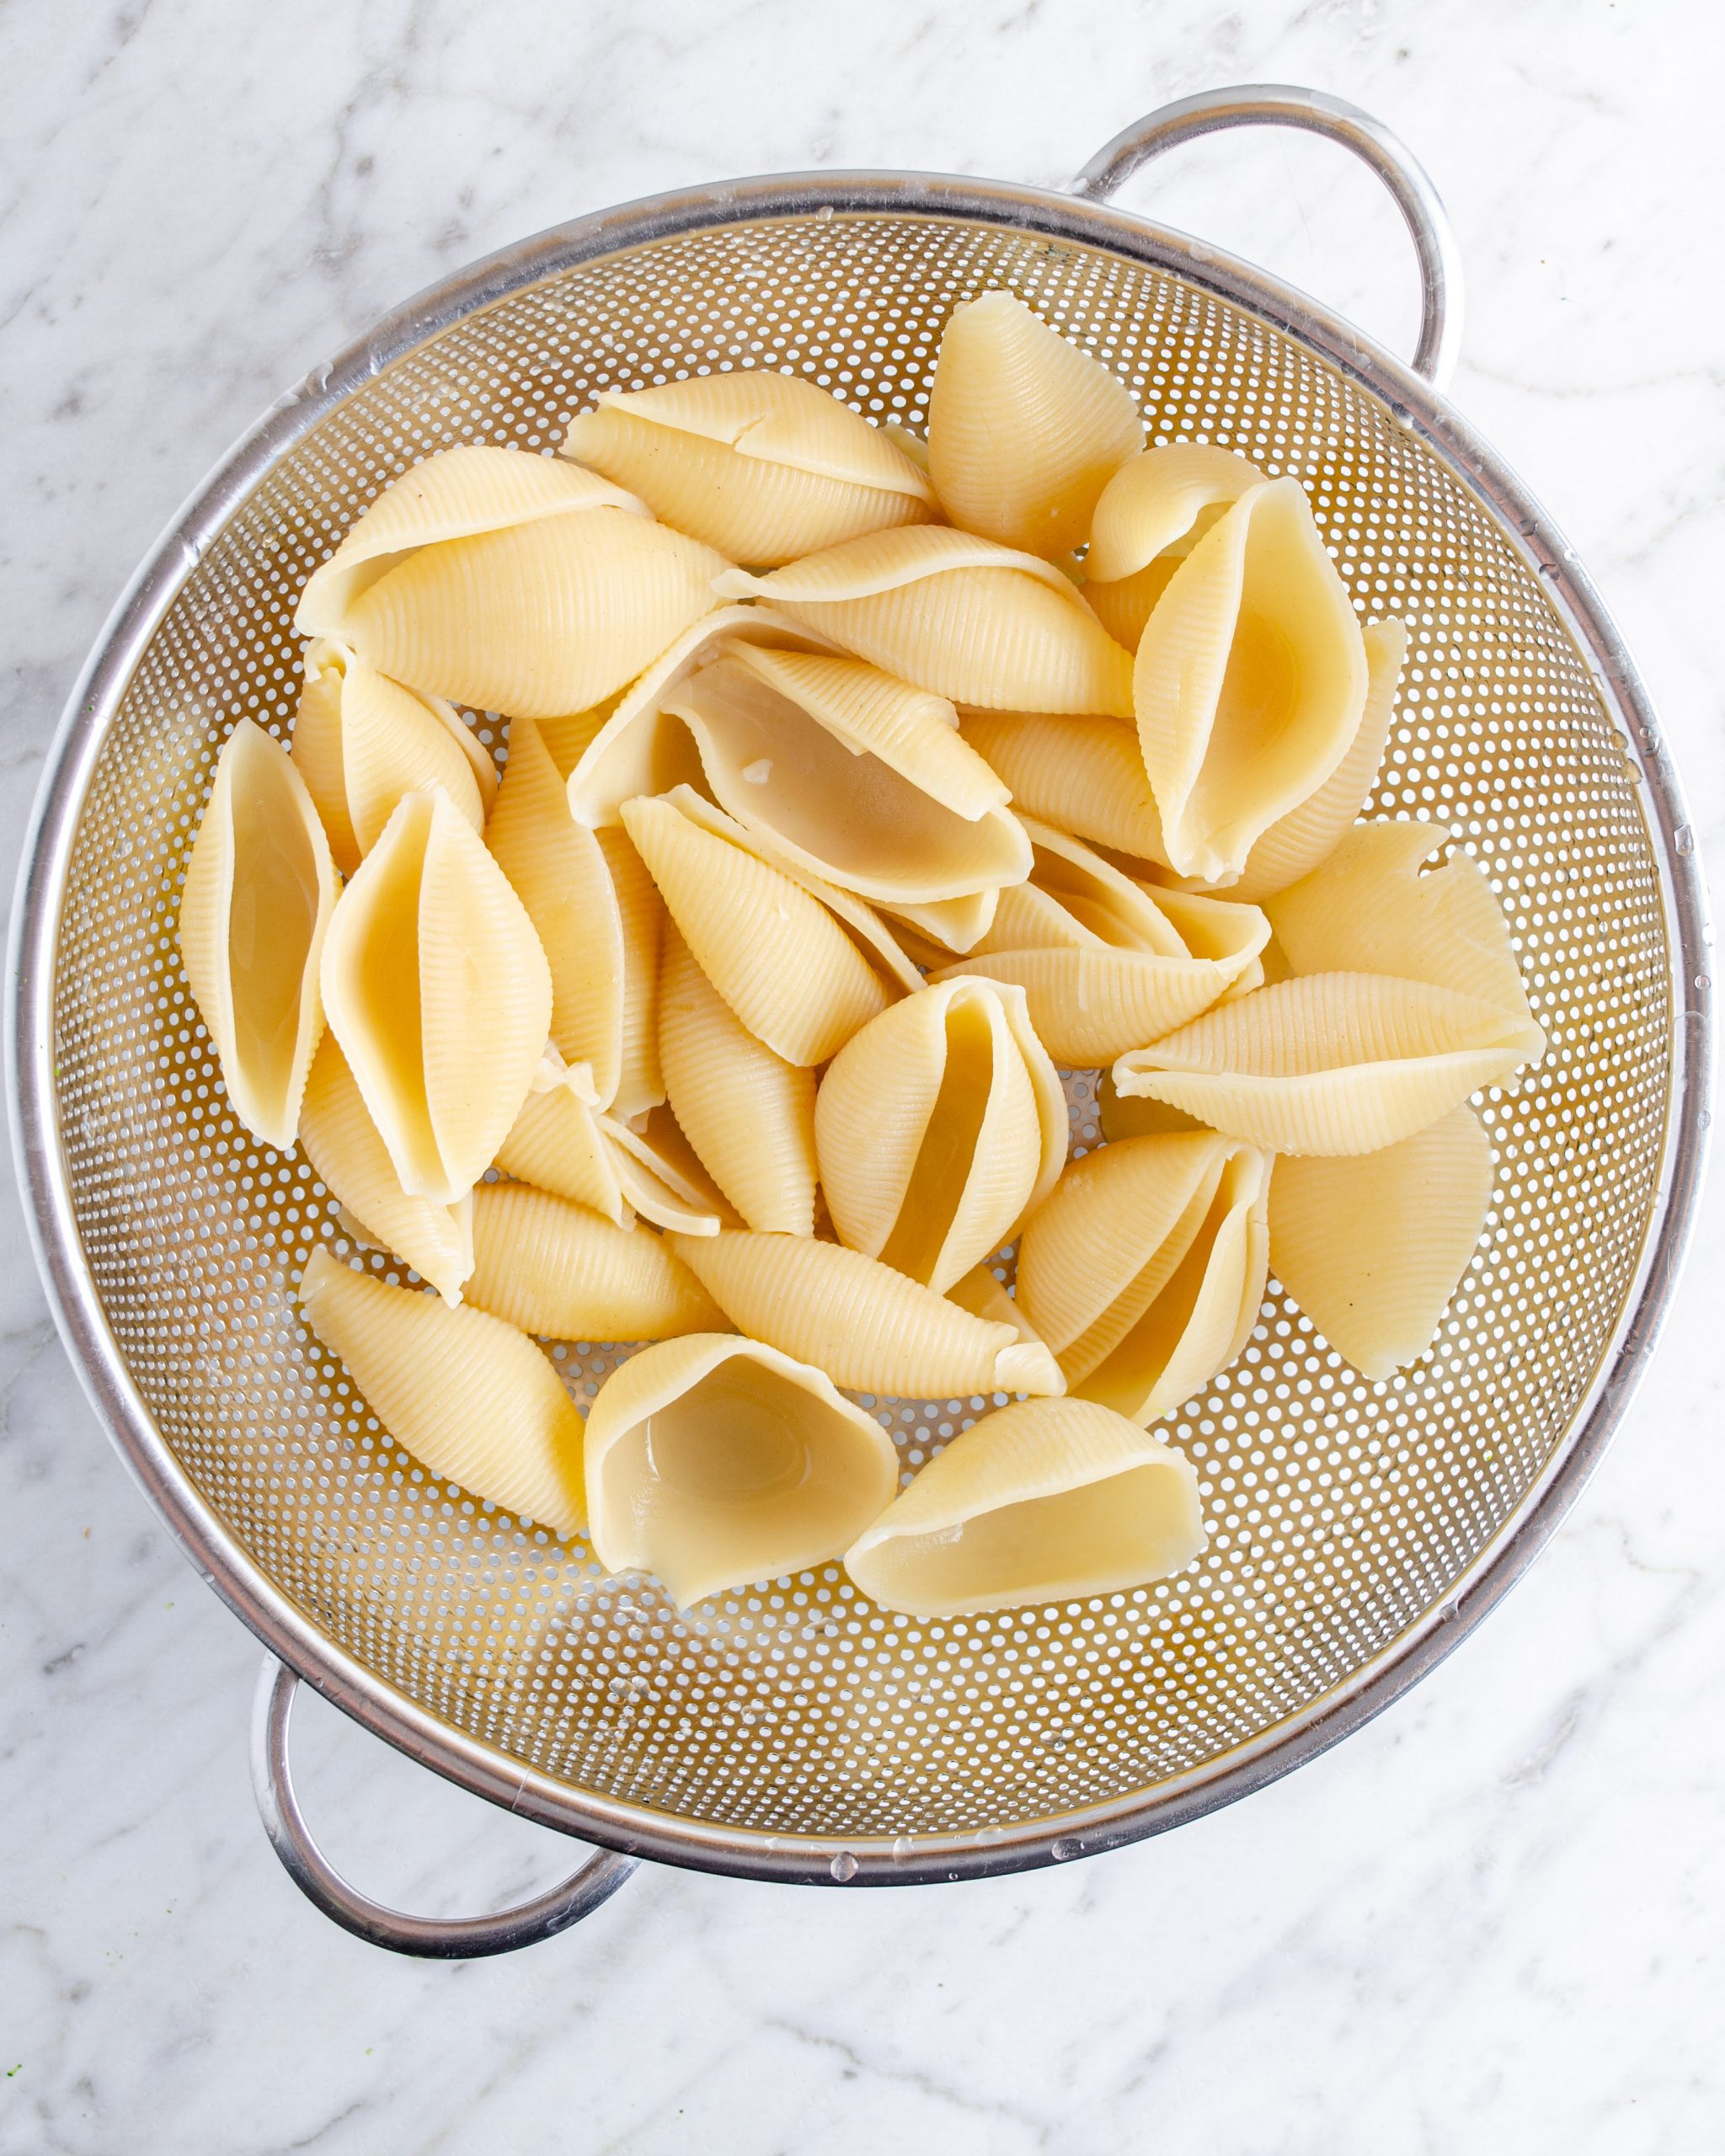 Boil the jumbo shells in water until al dente. Drain and rinse under cold water.